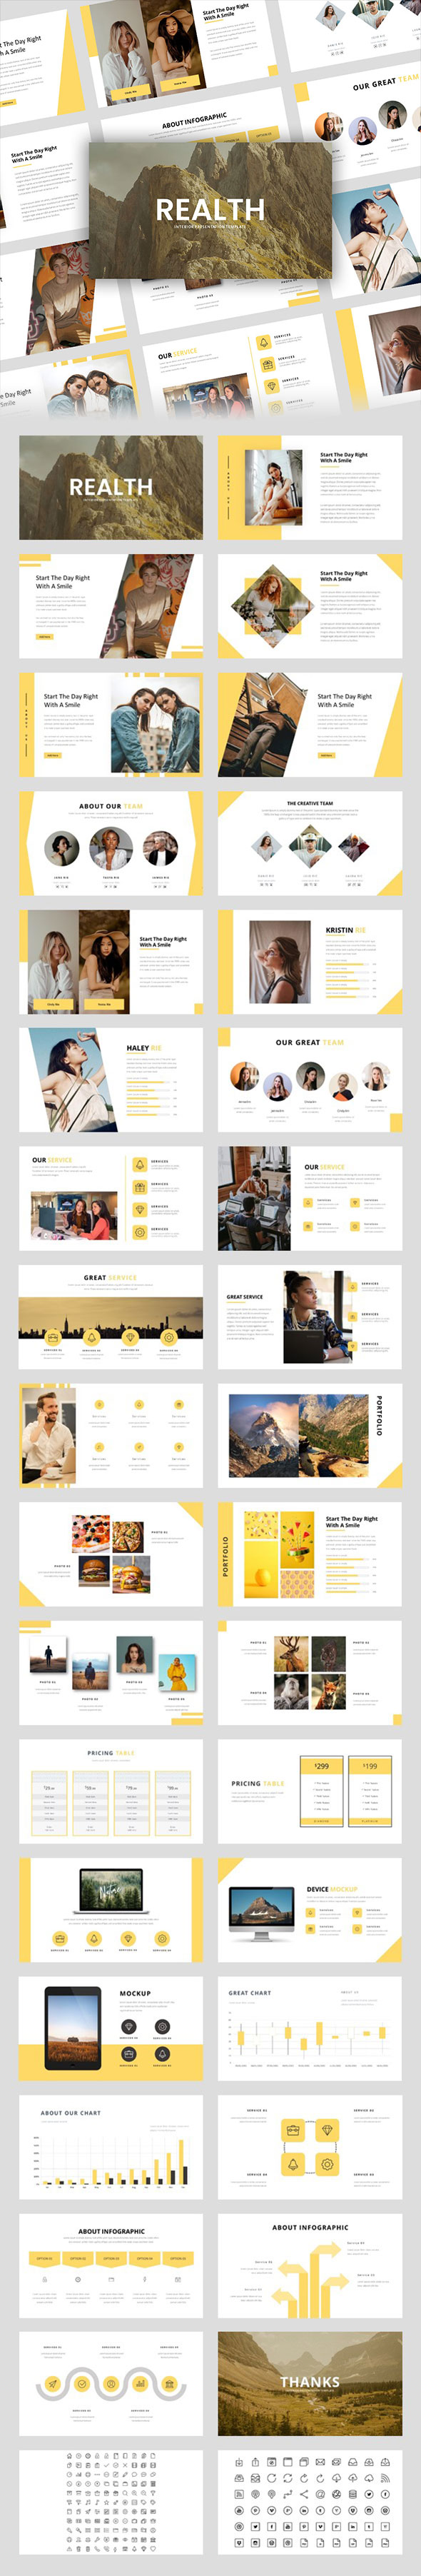 Realth – Creative Business PowerPoint Template